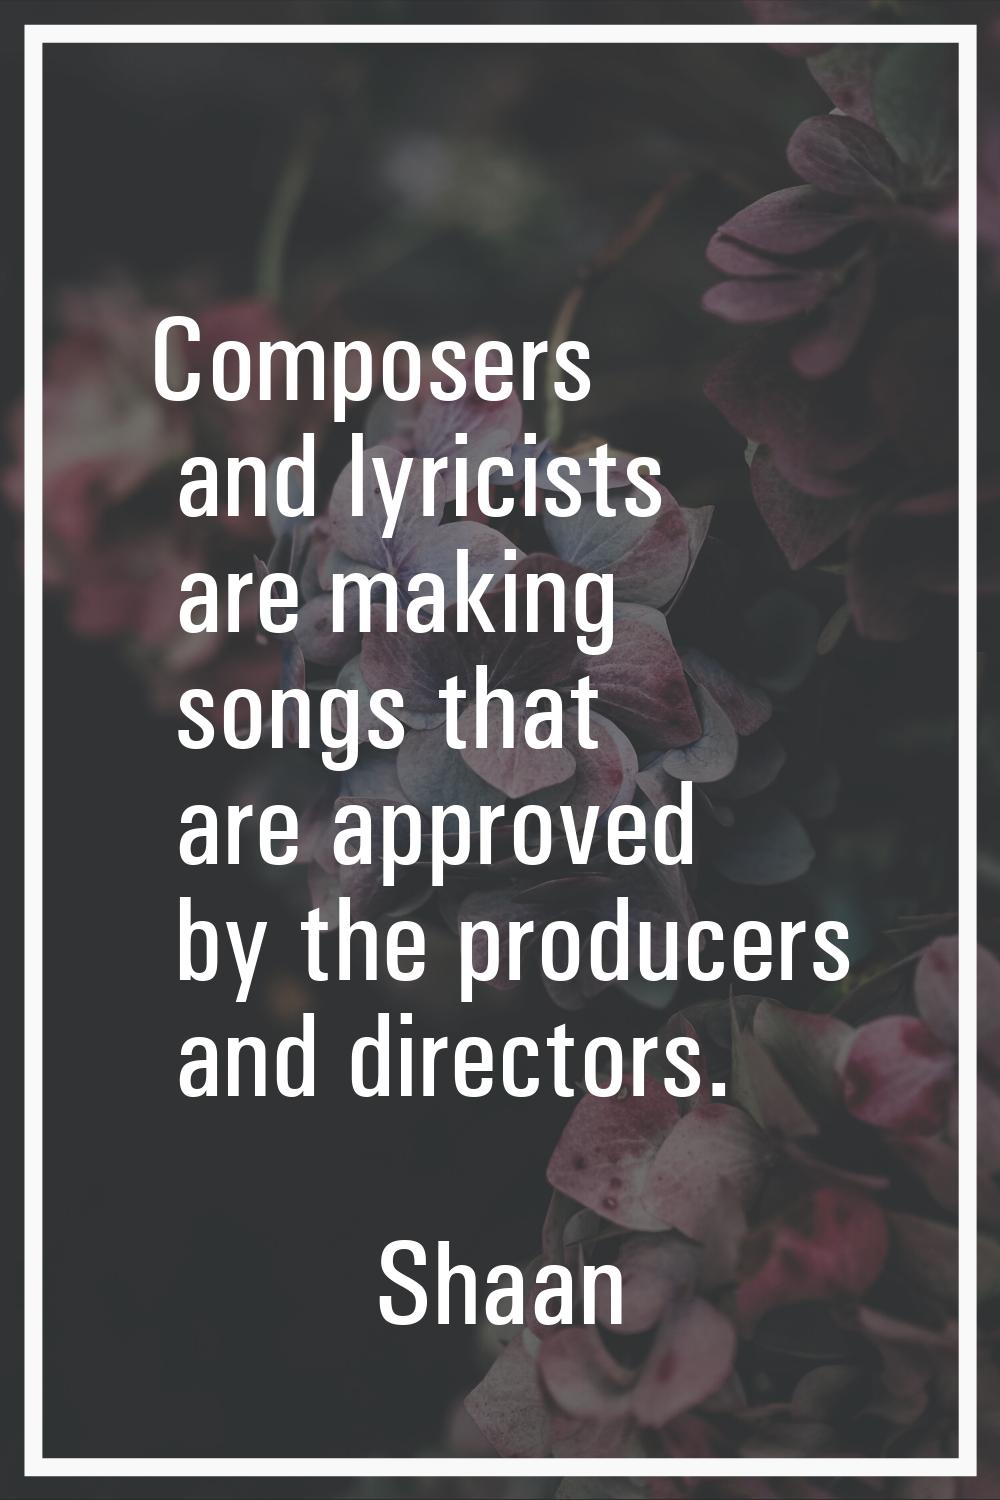 Composers and lyricists are making songs that are approved by the producers and directors.